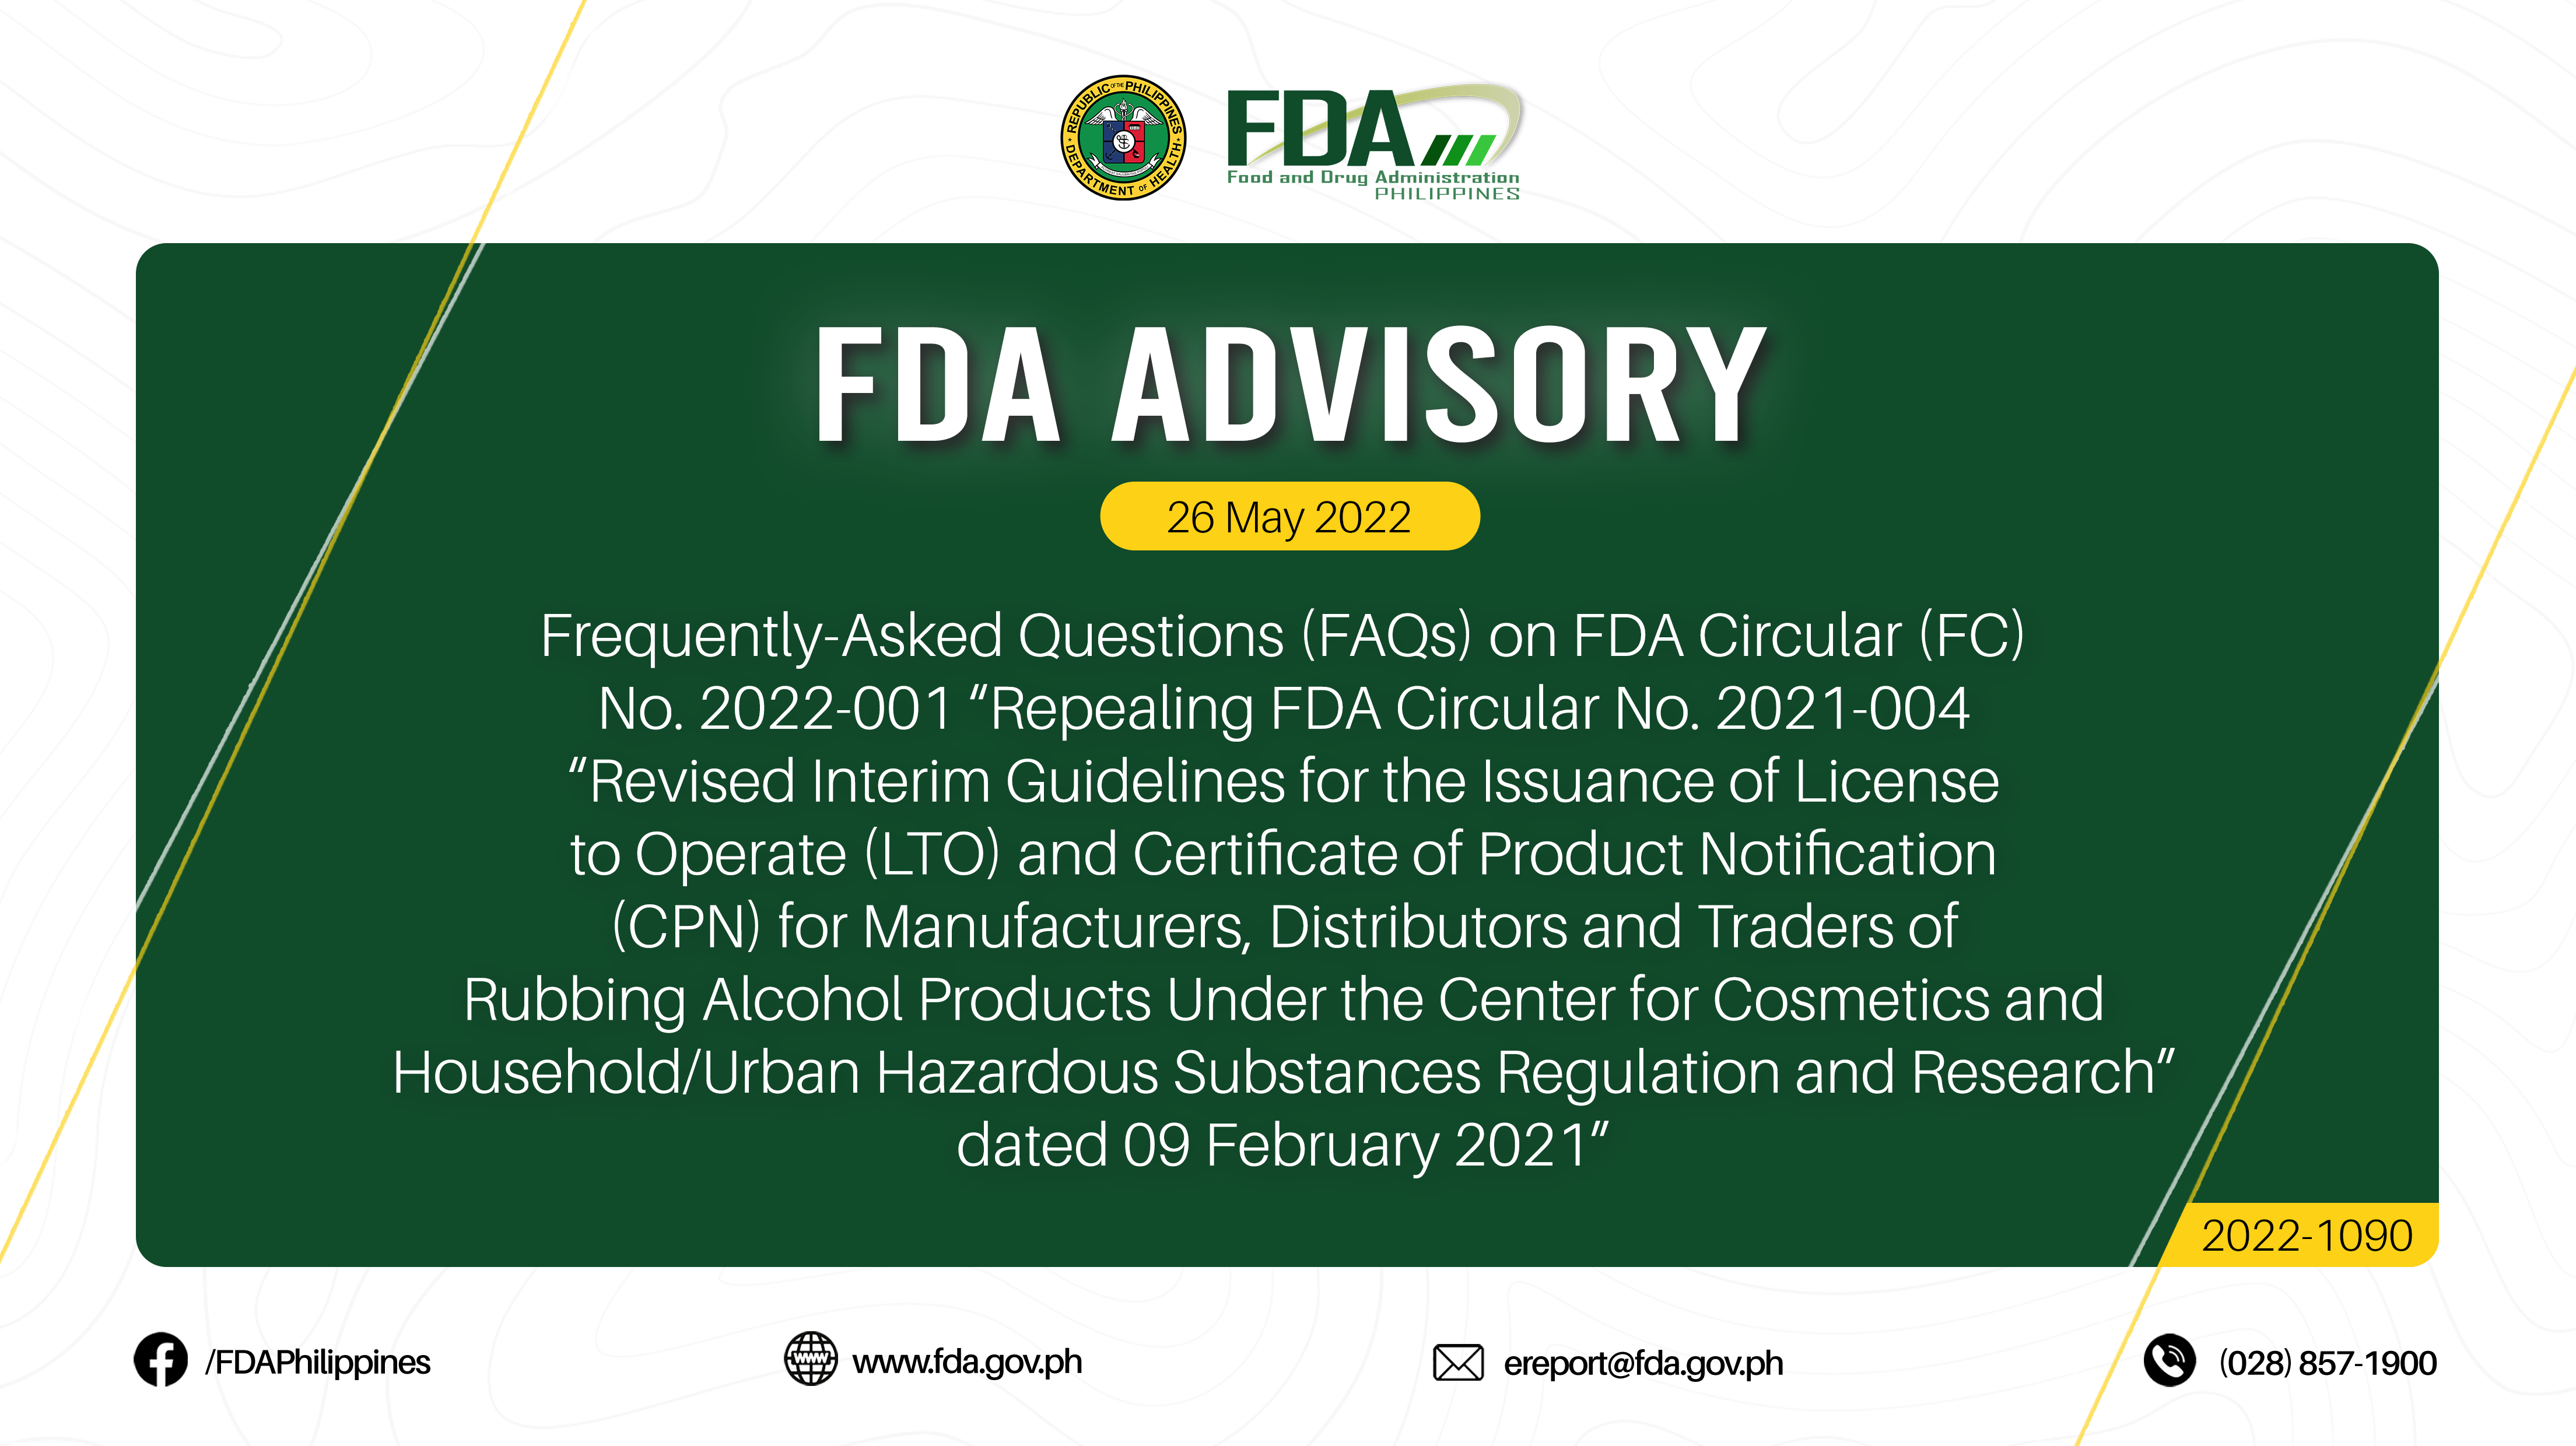 FDA Advisory No.2022-1090 || Frequently-Asked Questions (FAQs) on FDA Circular (FC) No. 2022-001 “Repealing FDA Circular No. 2021-004 “Revised Interim Guidelines for the Issuance of License to Operate (LTO) and Certificate of Product Notification (CPN) for Manufacturers, Distributors and Traders of Rubbing Alcohol Products Under the Center for Cosmetics and Household/Urban Hazardous Substances Regulation and Research” dated 09 February 2021”